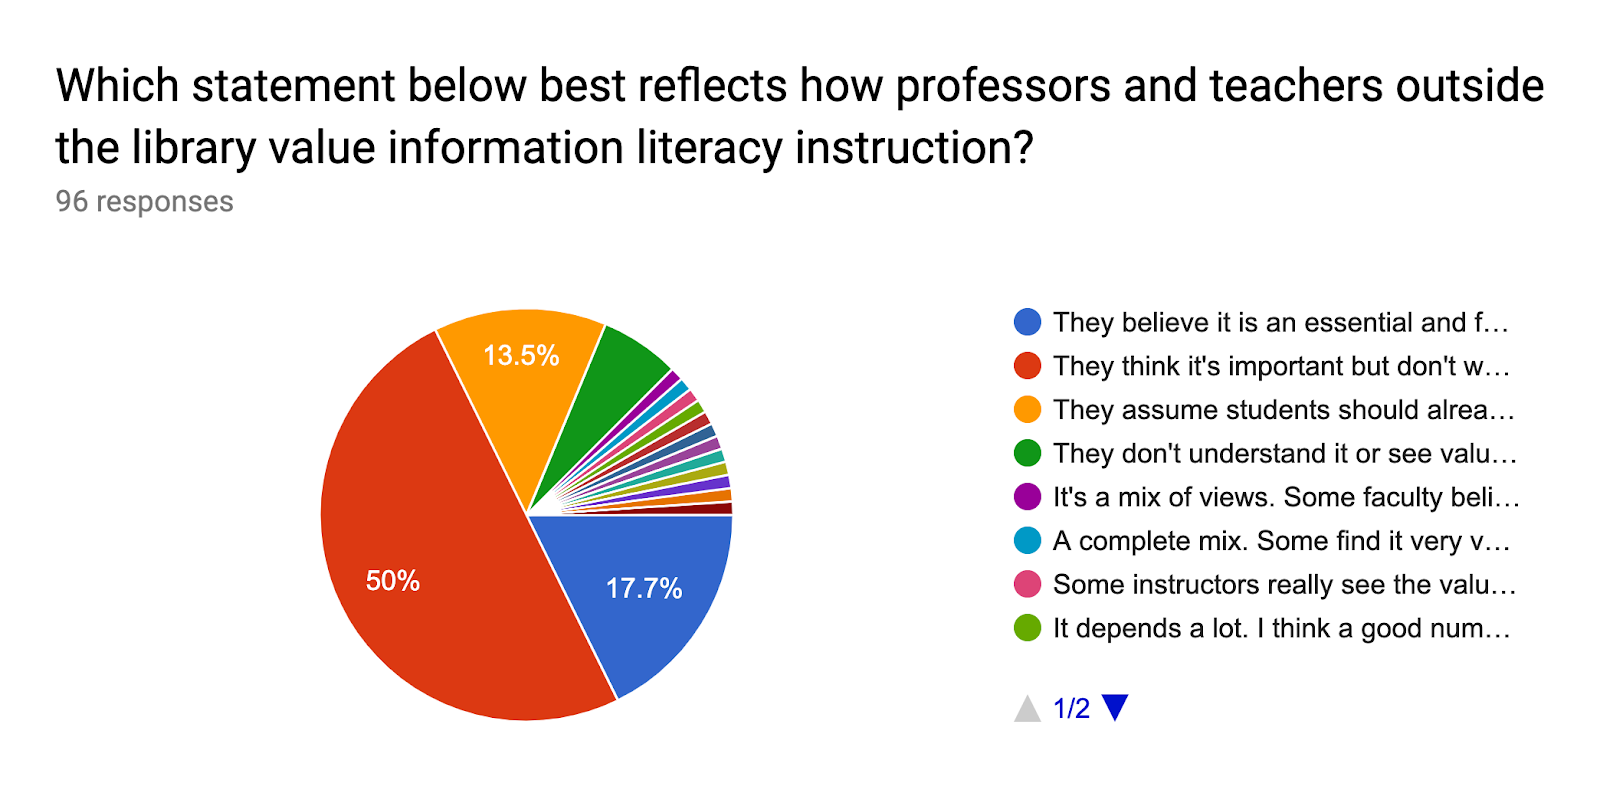 Forms response chart. Question title: Which statement below best reflects how professors and teachers outside the library value information literacy instruction?. Number of responses: 96 responses.